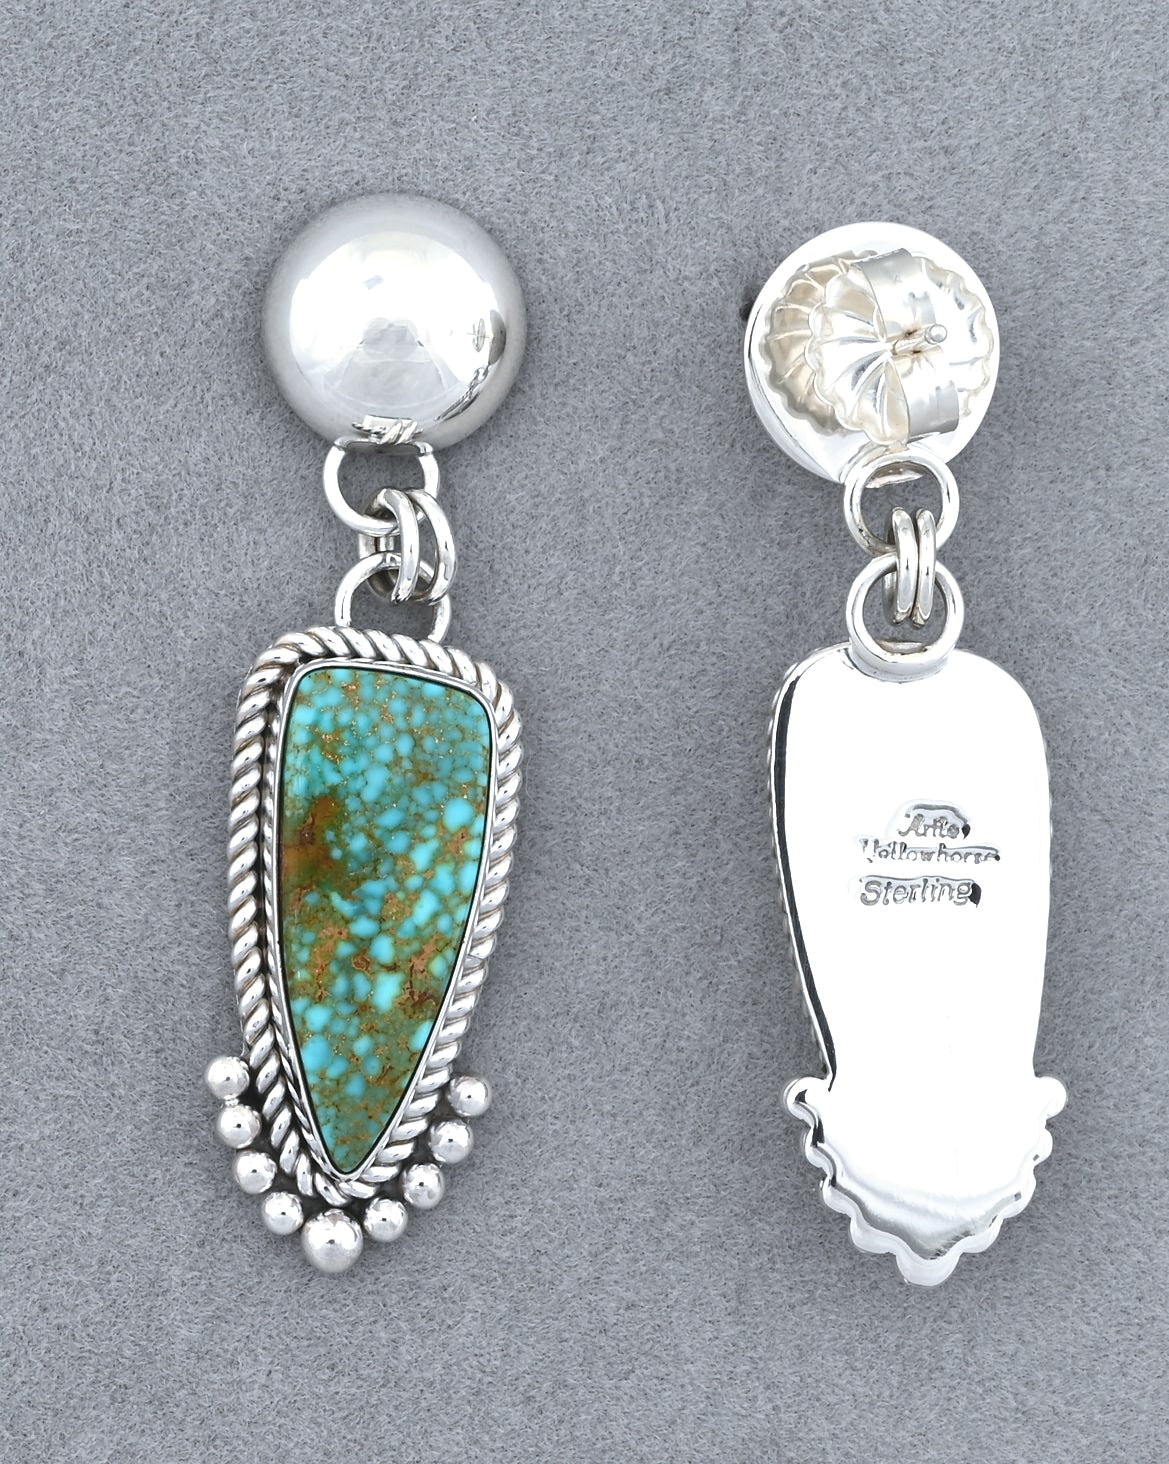 Earrings with Kingman Turquoise by Artie Yellowhorse